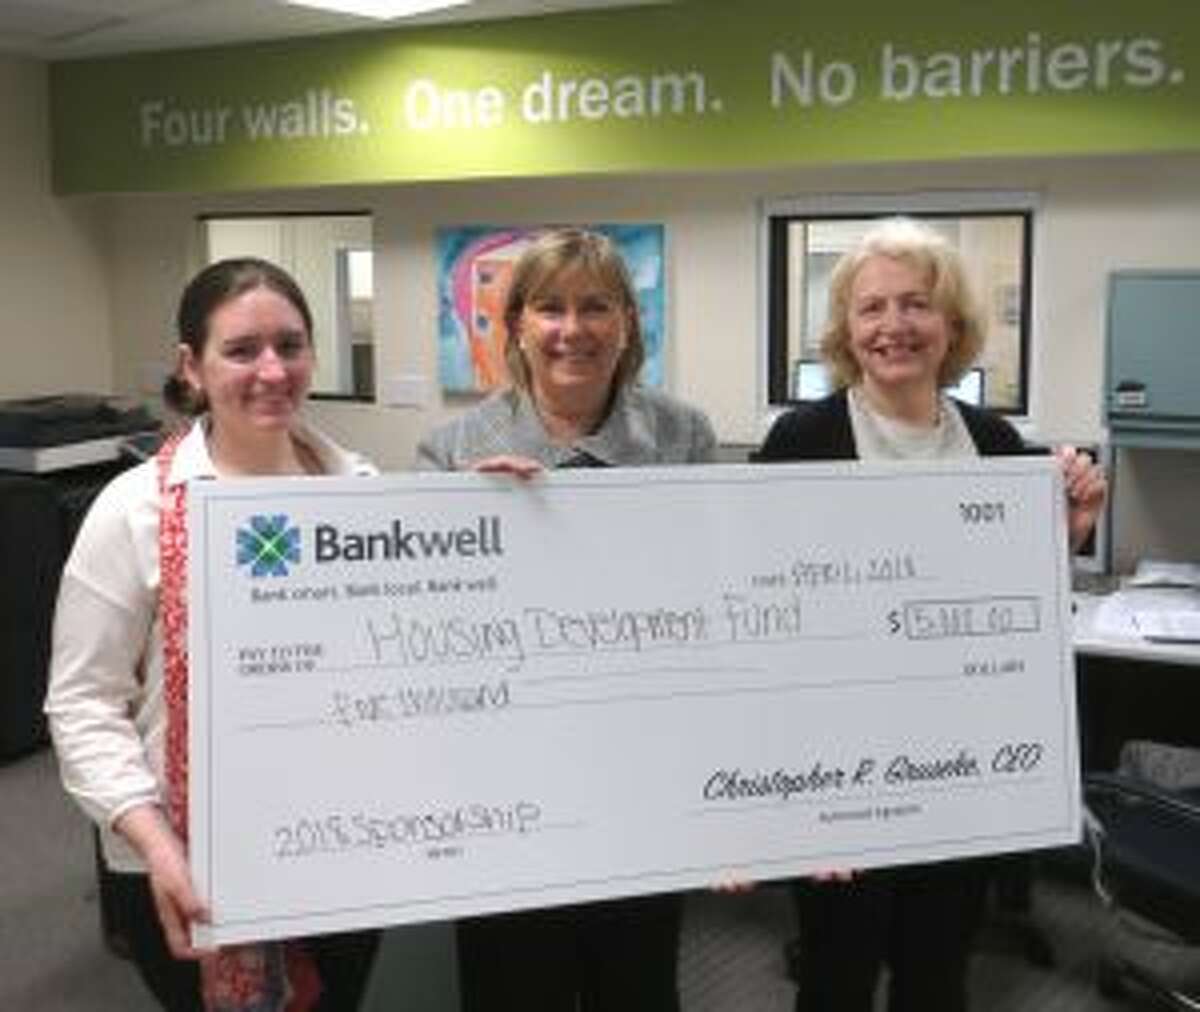 Bankwell, which has two locations in New Canaan recently gave to the Housing Development Fund.